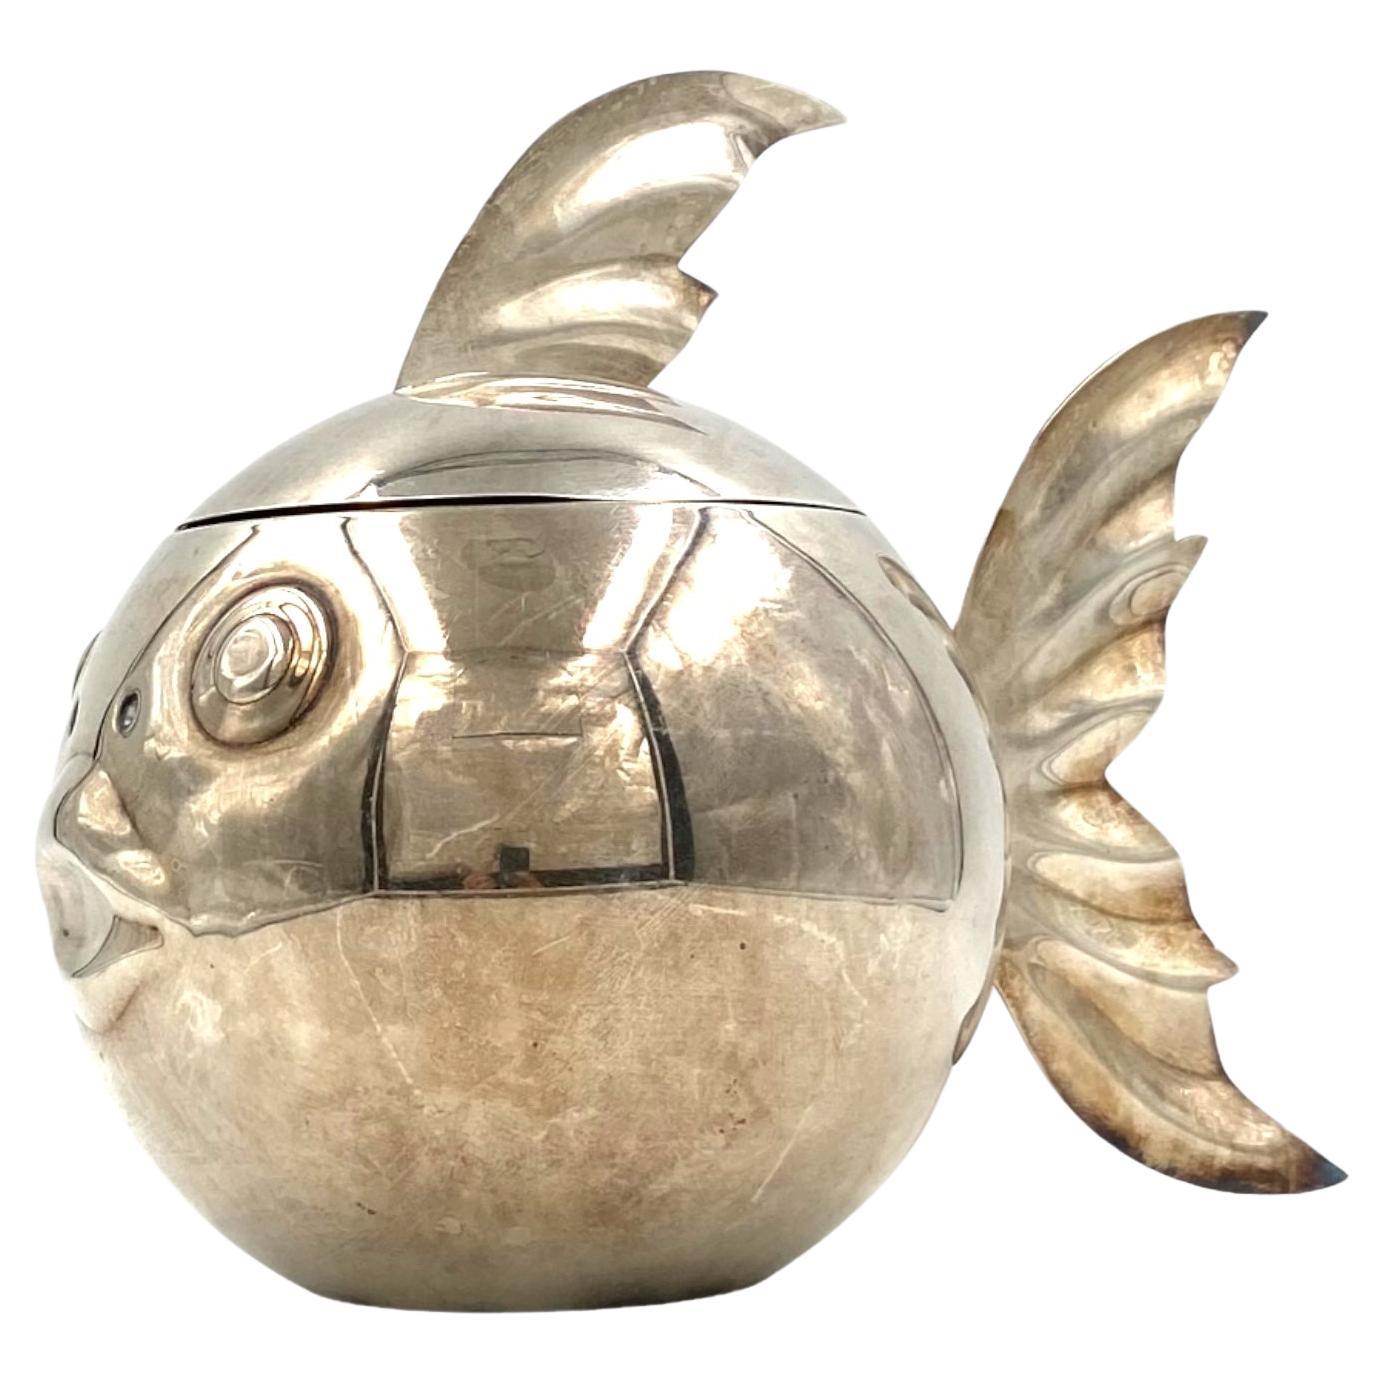 Modern silver-plated fish wine cooler / ice bucket, Teghini Firenze Italy 1970s